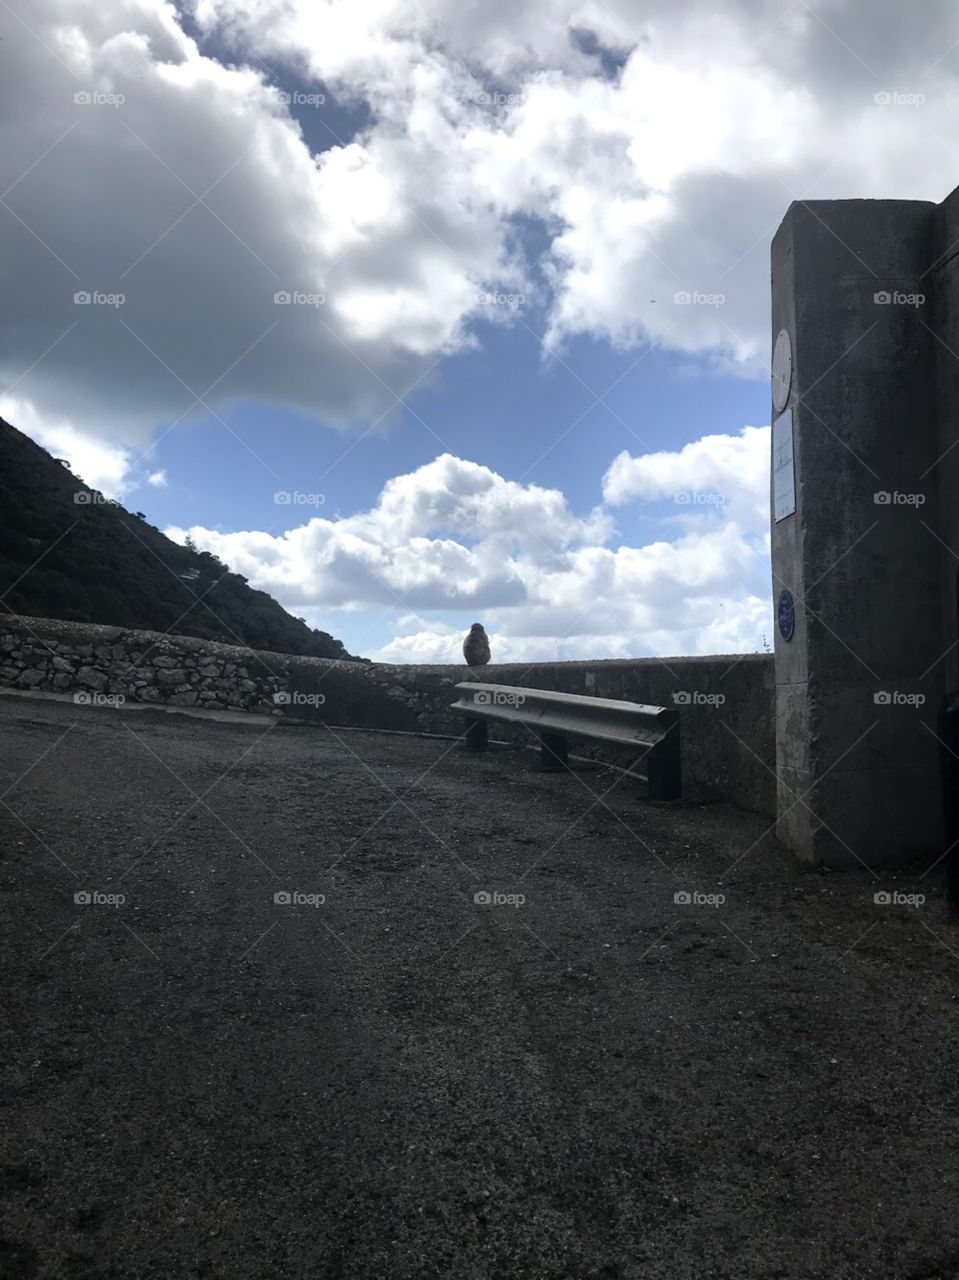 Monkey on a road ledge on mountain with blue sky and clouds 